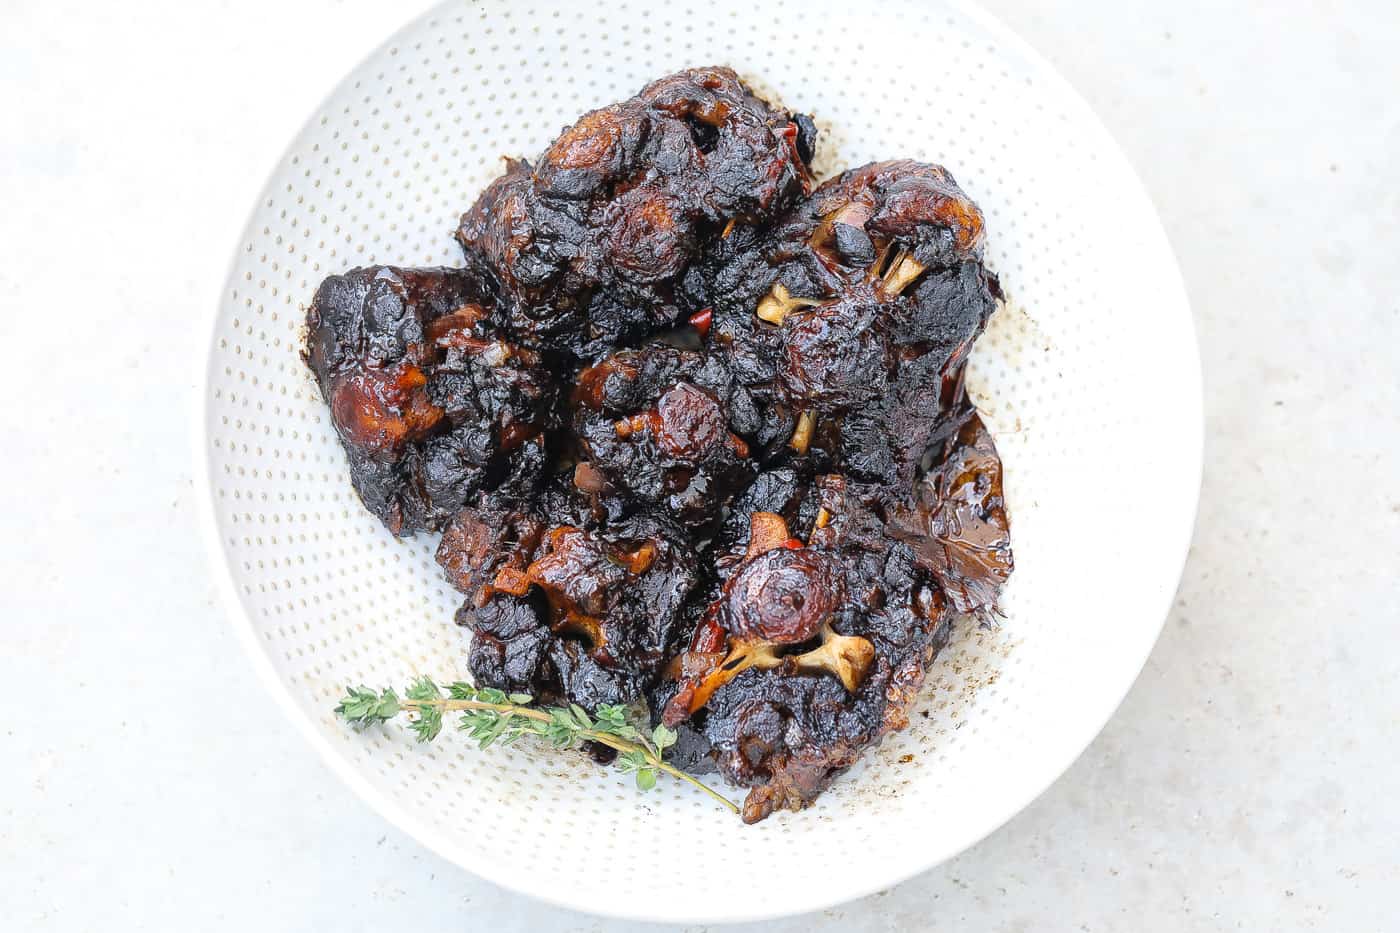 https://www.foodfidelity.com/wp-content/uploads/2021/11/beef-oxtail-hor-tight-fav-1.jpg